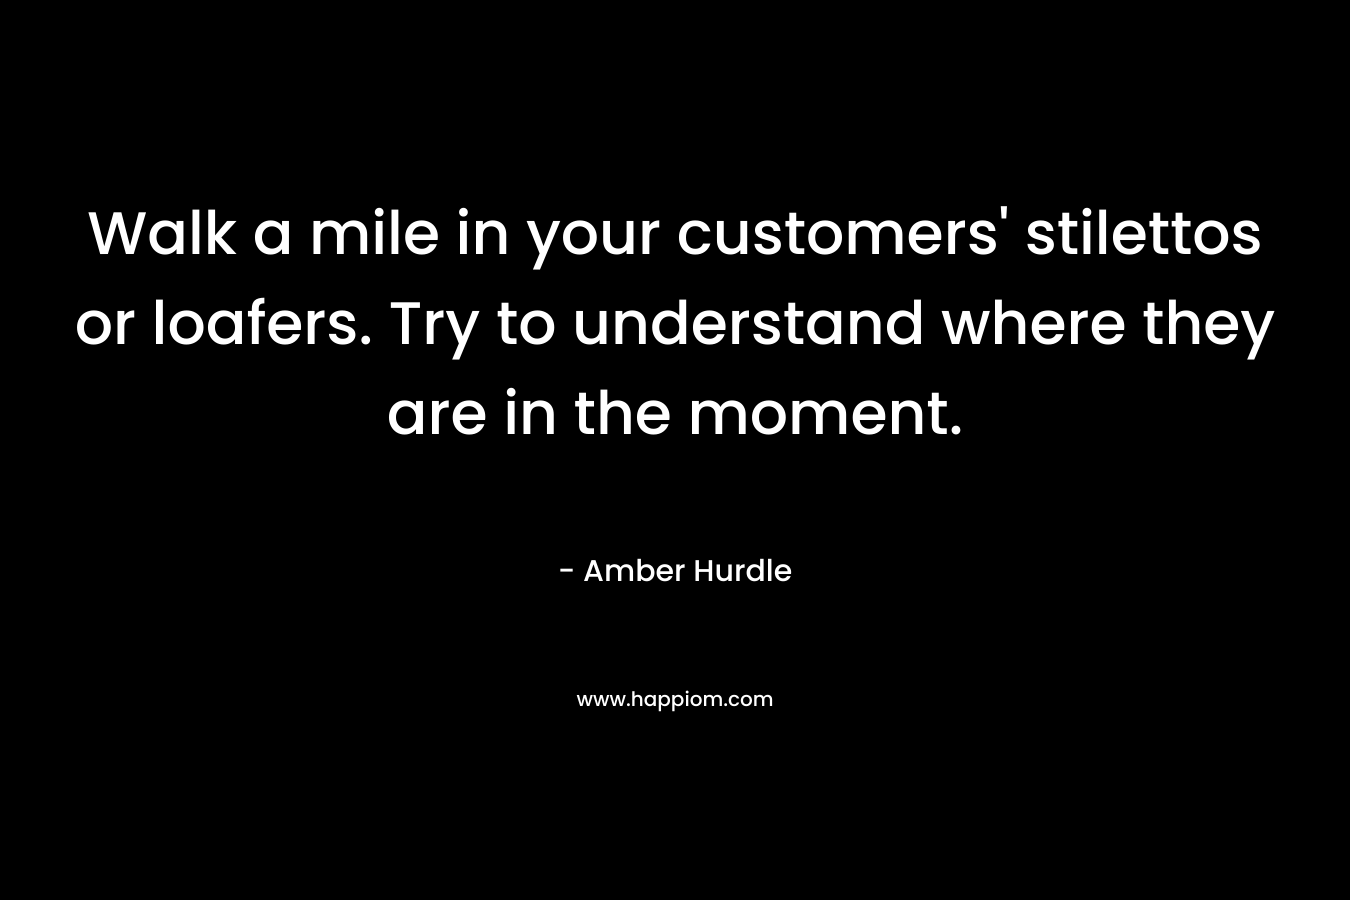 Walk a mile in your customers' stilettos or loafers. Try to understand where they are in the moment.